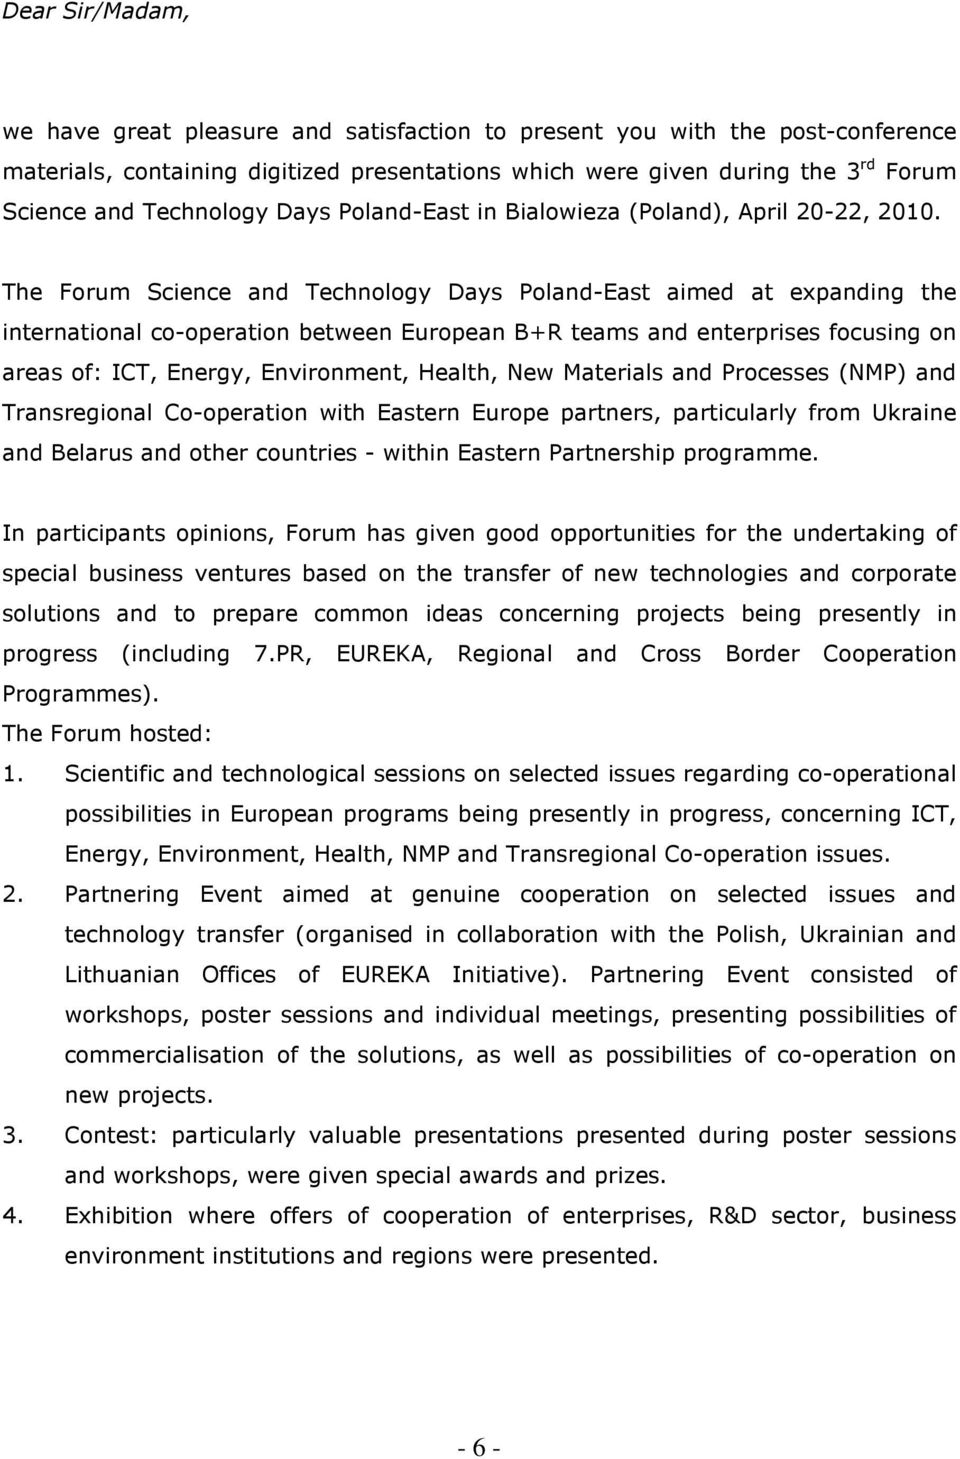 The Forum Science and Technology Days -East aimed at expanding the international co-operation between European B+R teams and enterprises focusing on areas of: ICT, Energy, Environment, Health, New